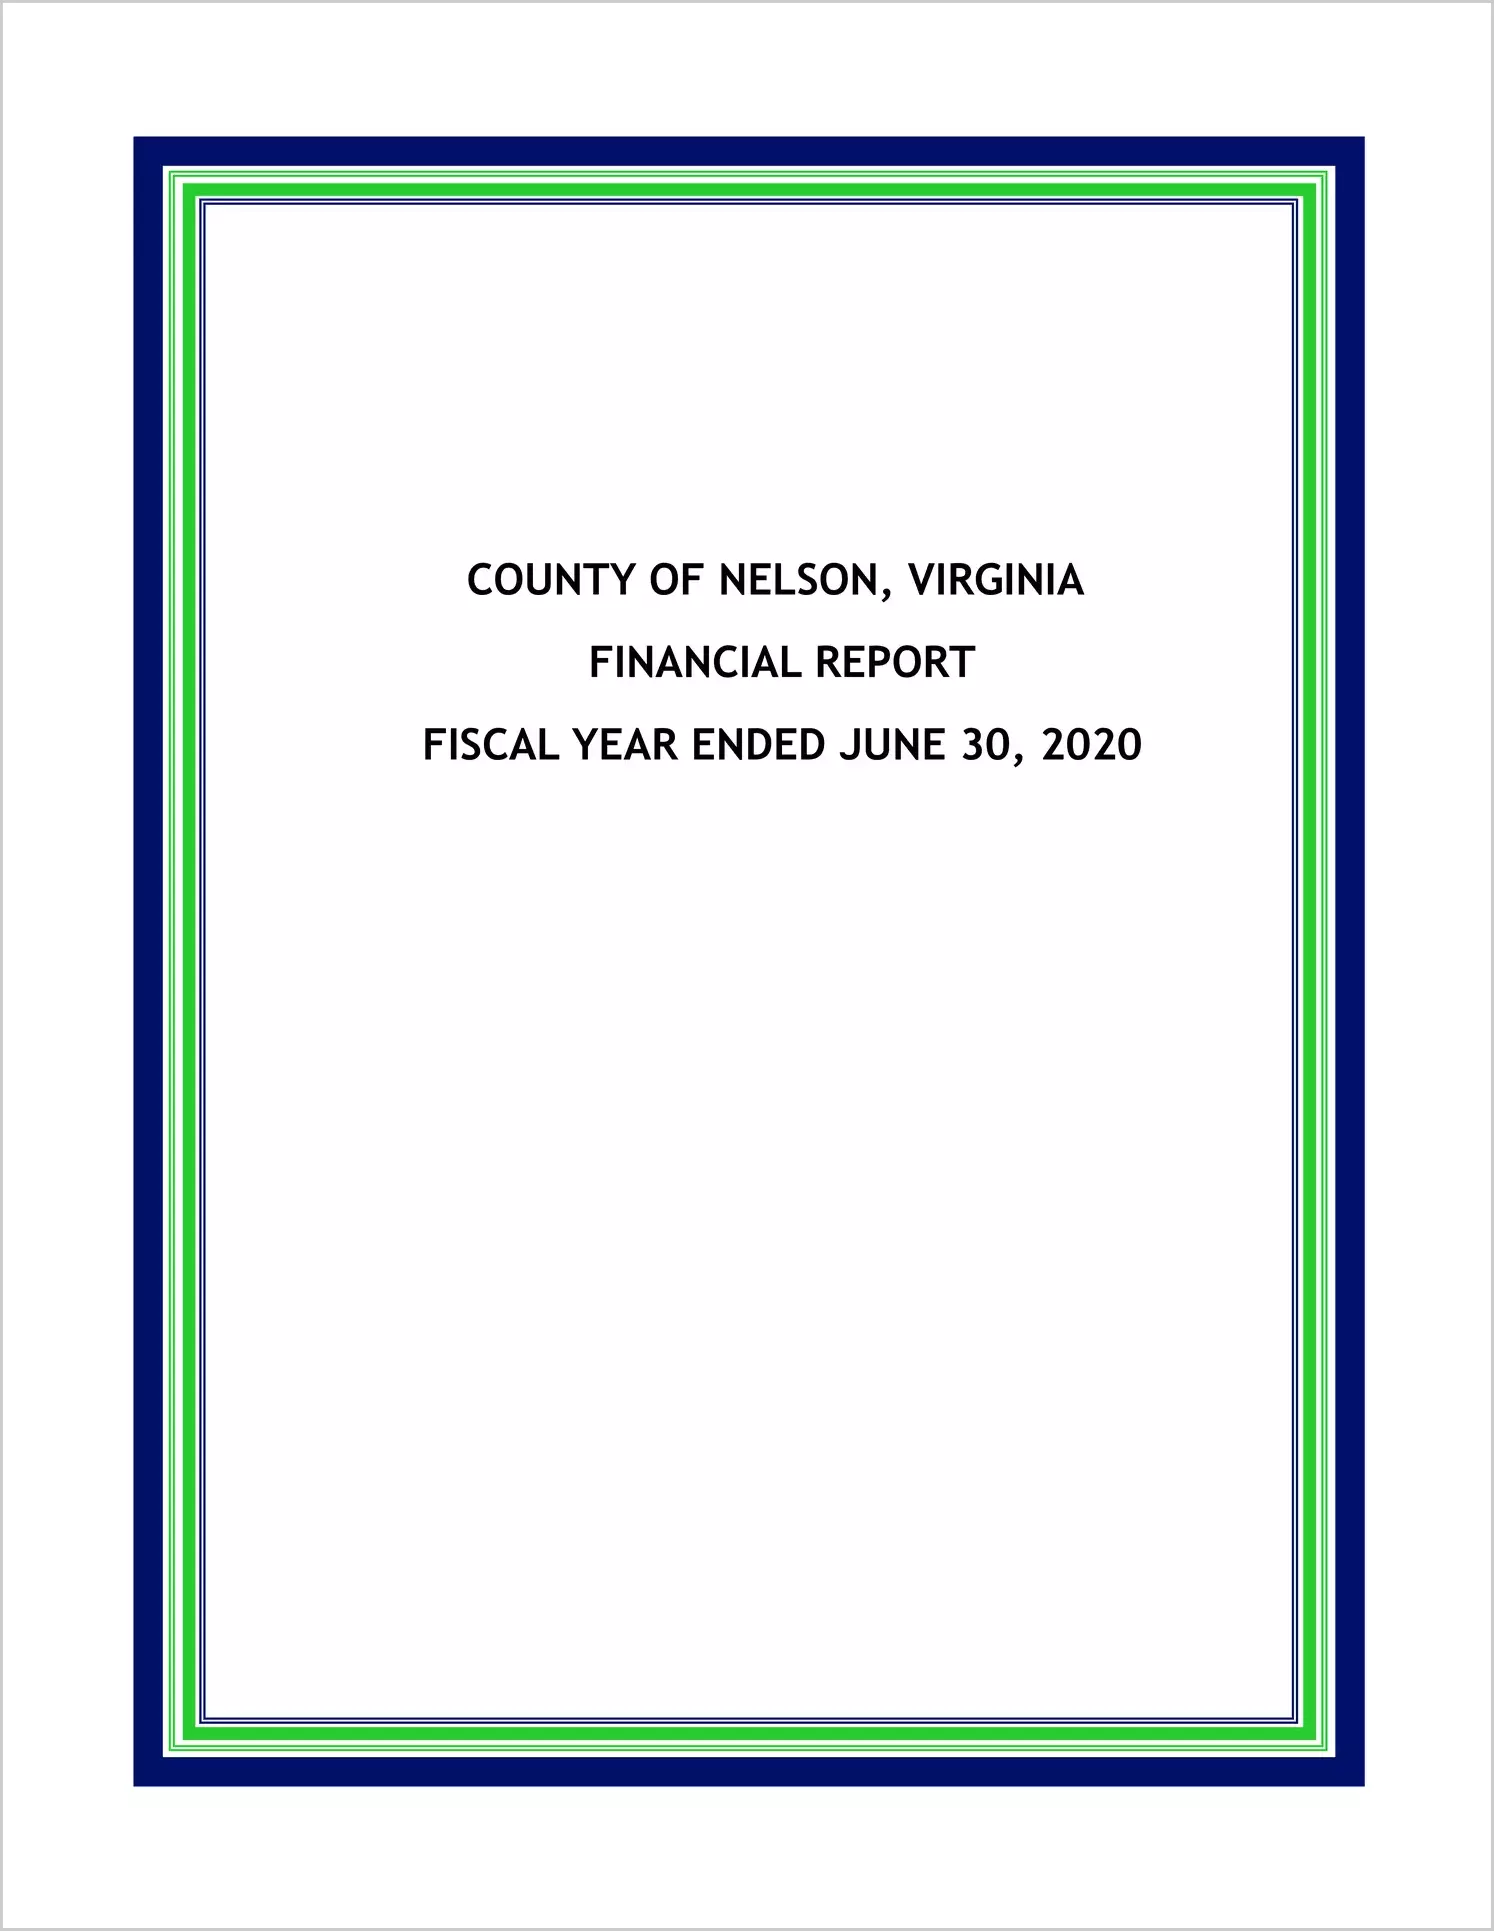 2020 Annual Financial Report for County of Nelson